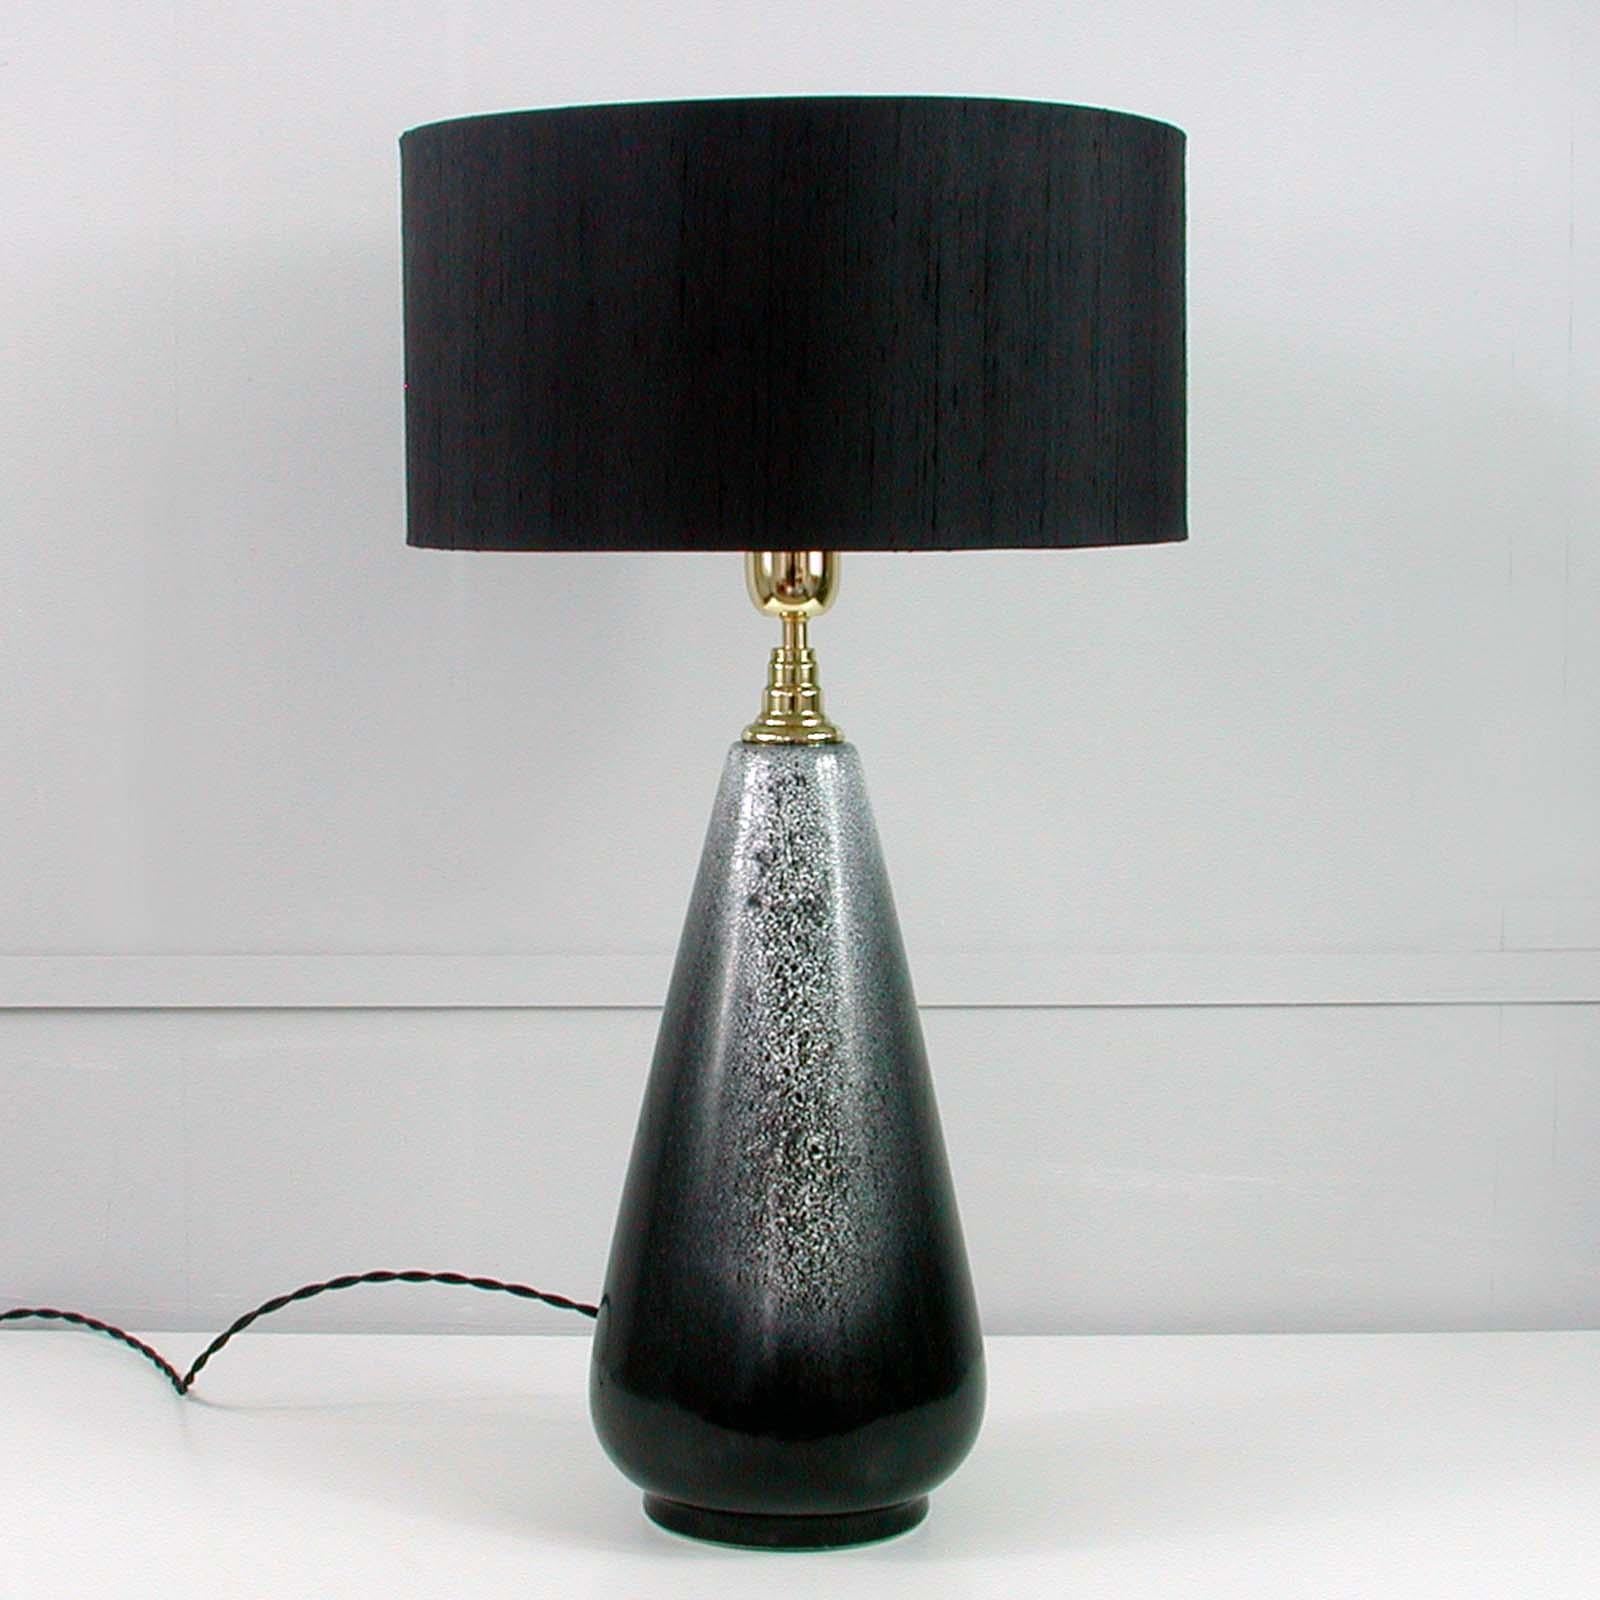 This very large and elegant Scandinavian Modern table lamp was designed and manufactured in Sweden in the 1960s. It has got a black / grey / white ceramic base and a brass bulb holder.  

The lamp has been rewired (with black silk cord) and